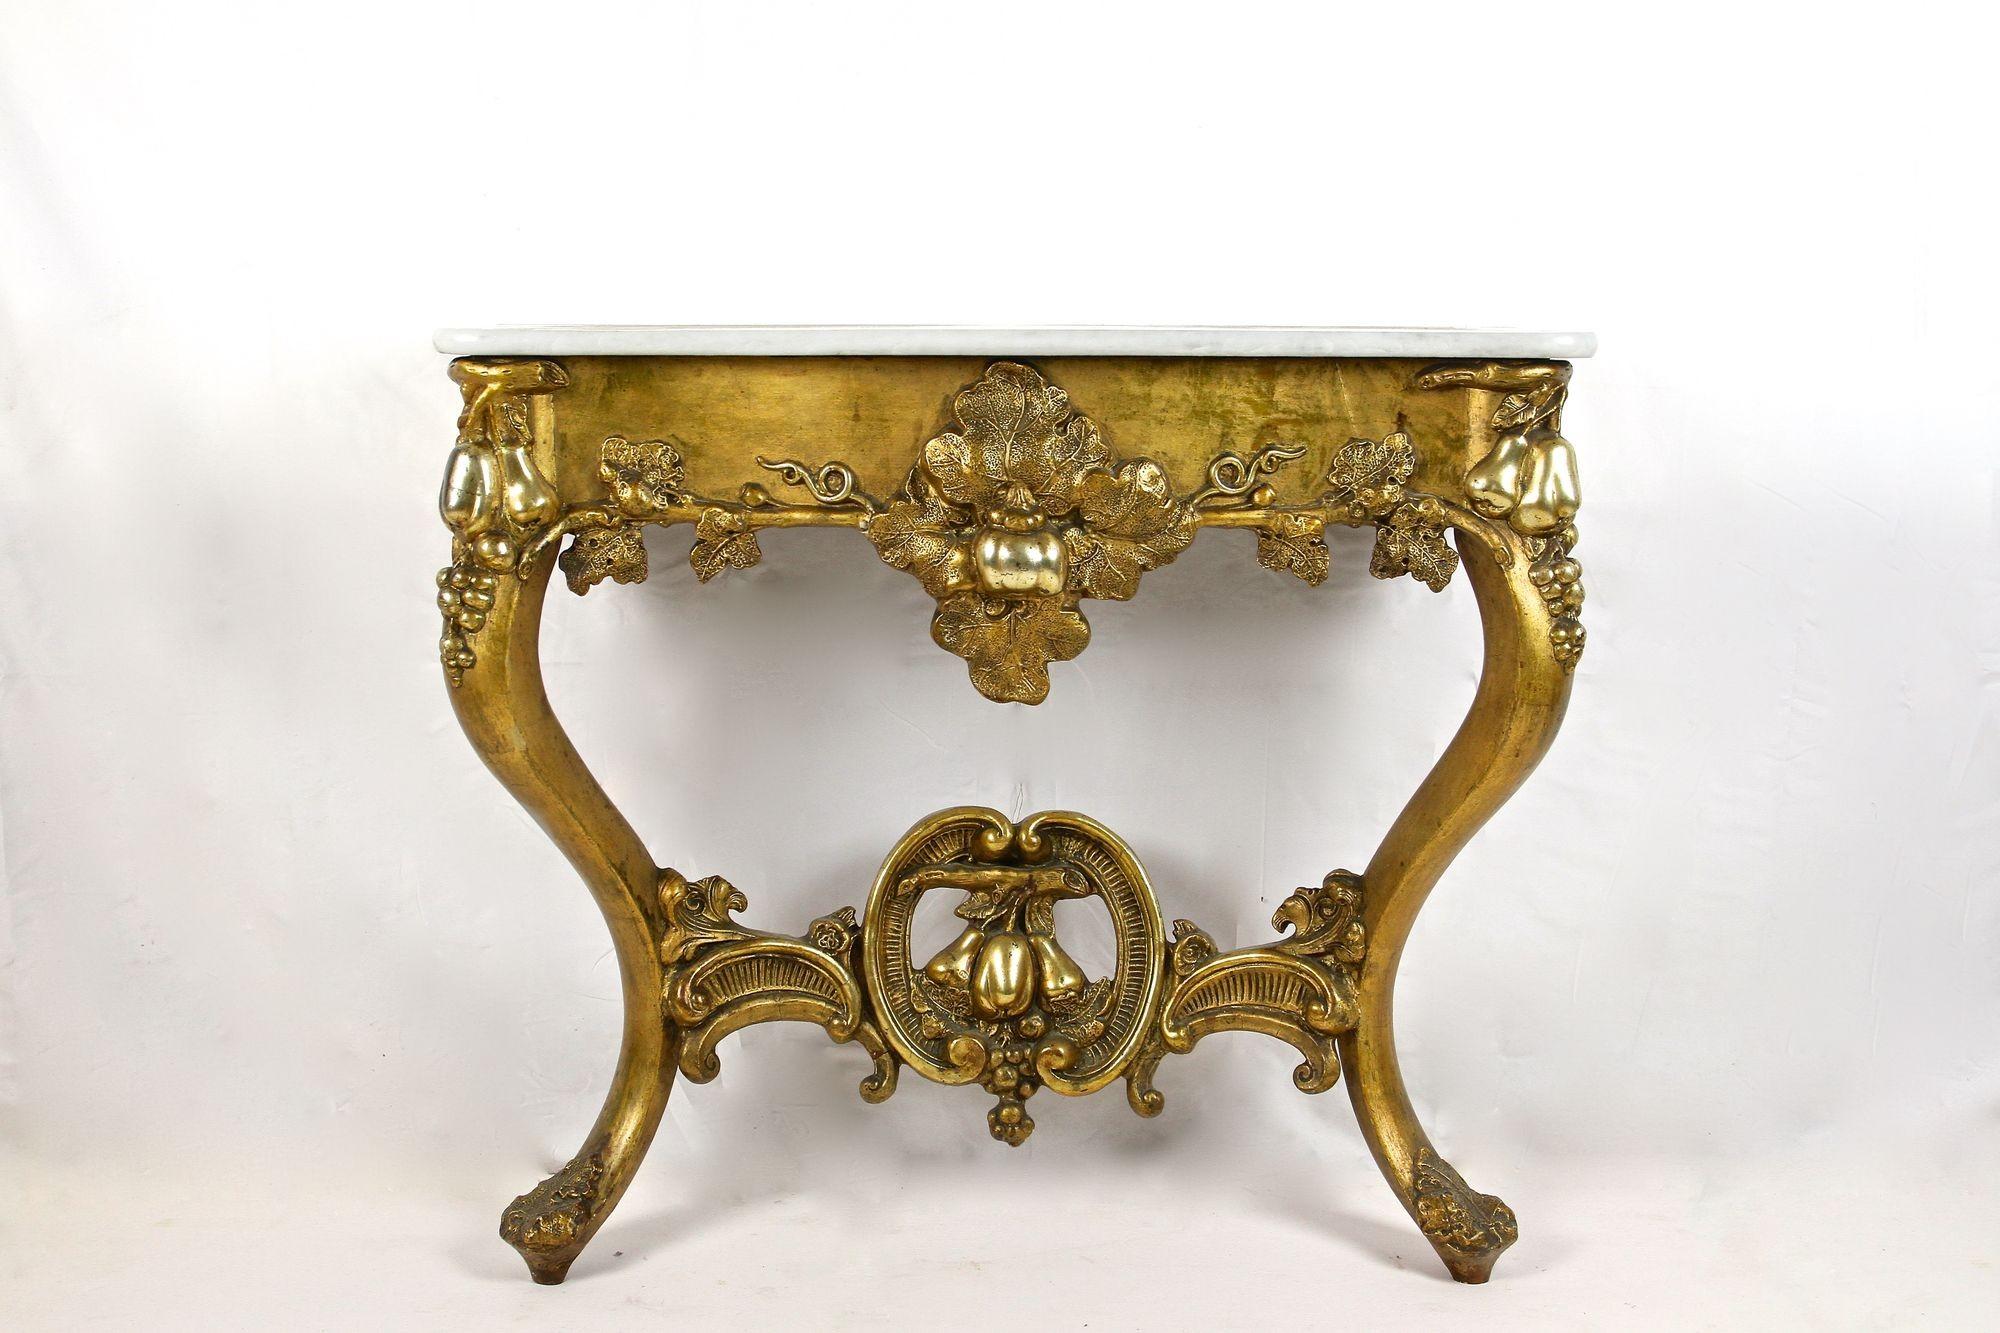 Noble 18th century gilt baroque wall console table out of Austria from the period around 1780. Showing a very artfully processed design, this amazing looking wall console was part of the inventory of a castle. Hand crafted in the late baroque era